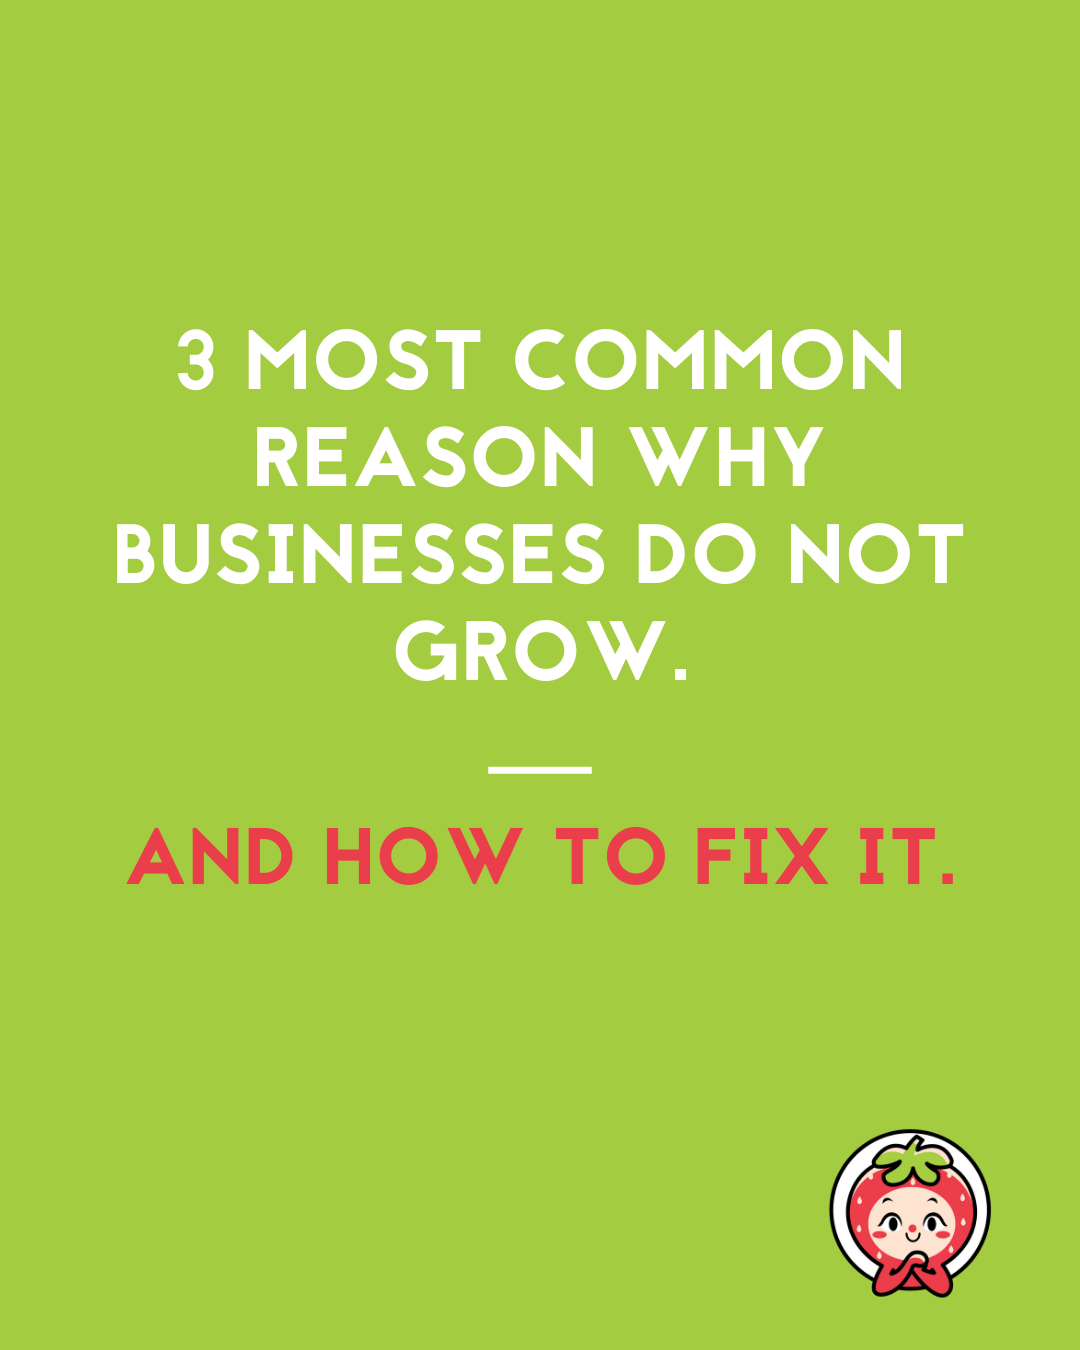 The top 3 reasons businesses do not grow (and how to fix it)